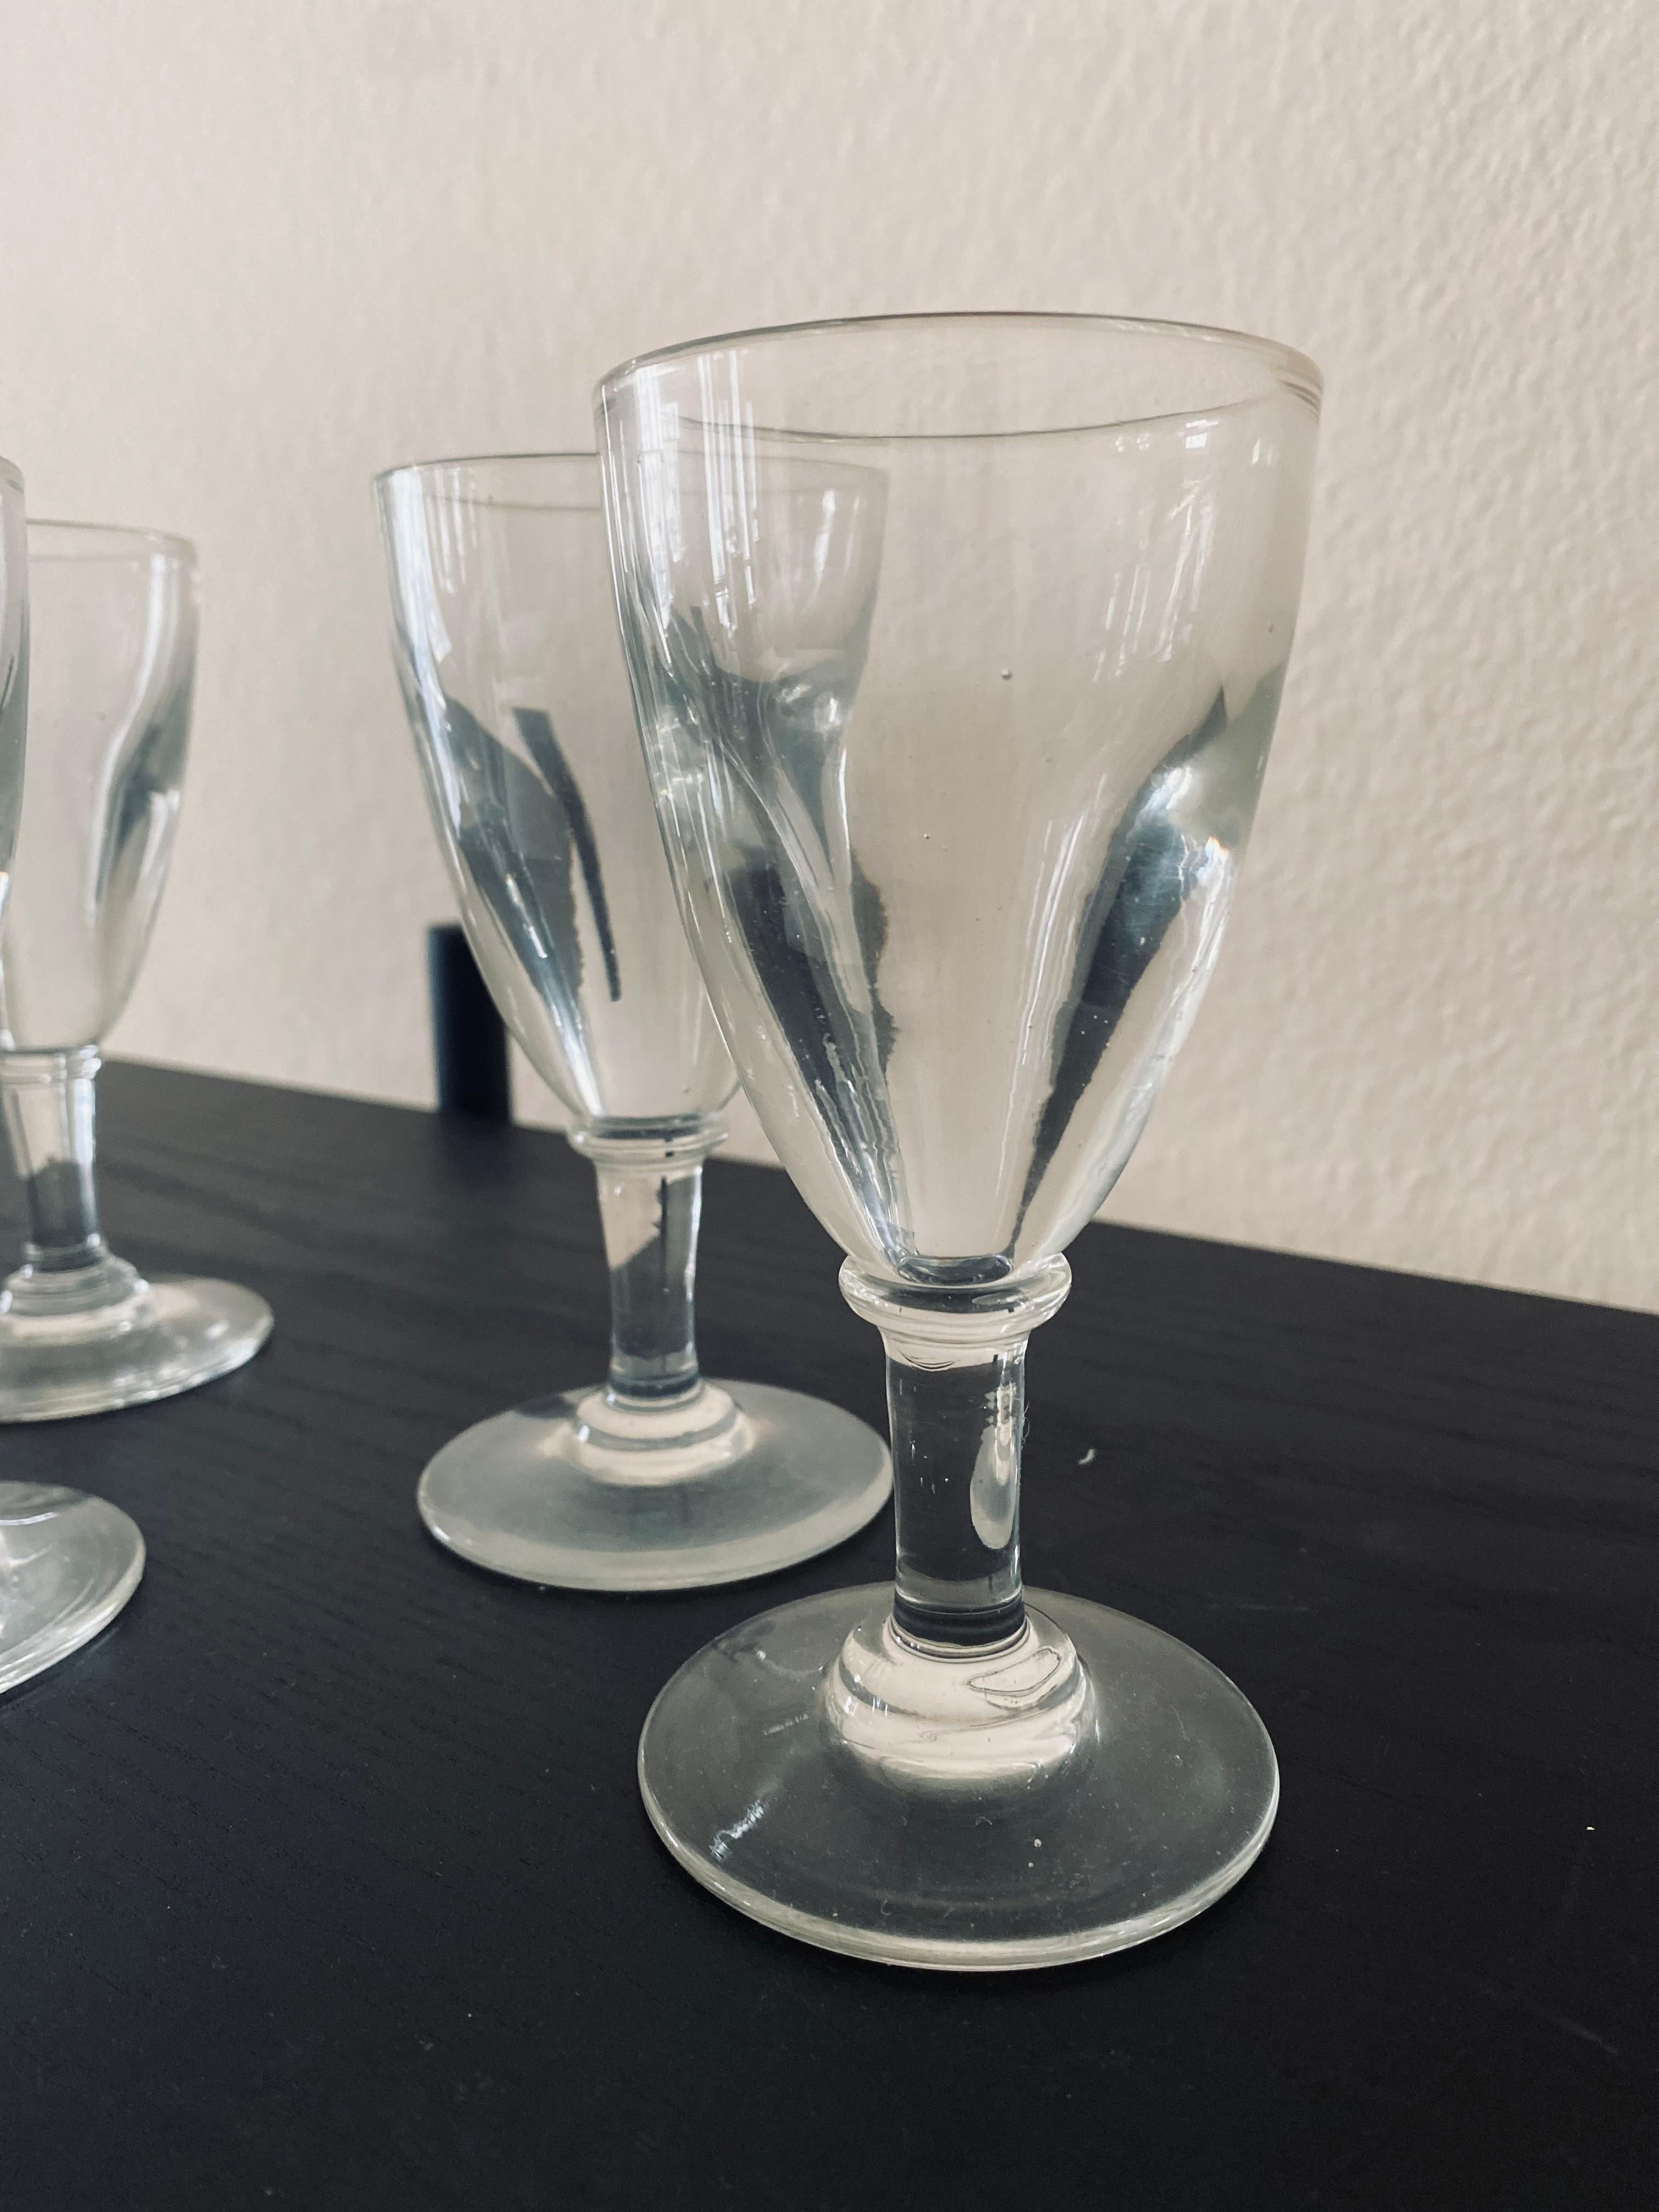 French Vintage Pasties Glasses from 1900 France: Timeless Elegance in Antique Glassware For Sale